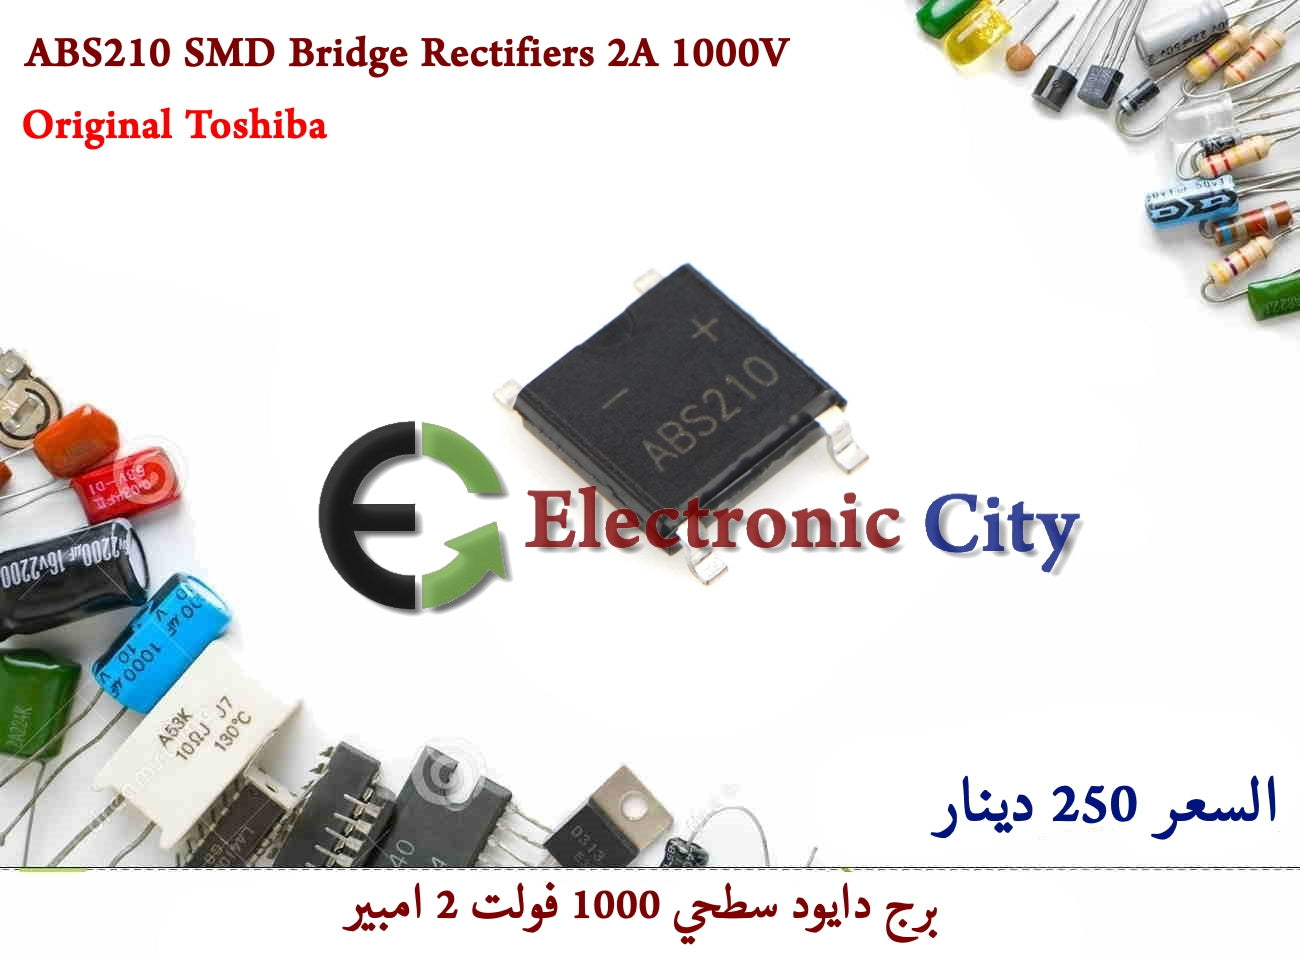 ABS210 SMD Bridge Rectifiers 2A 1000V